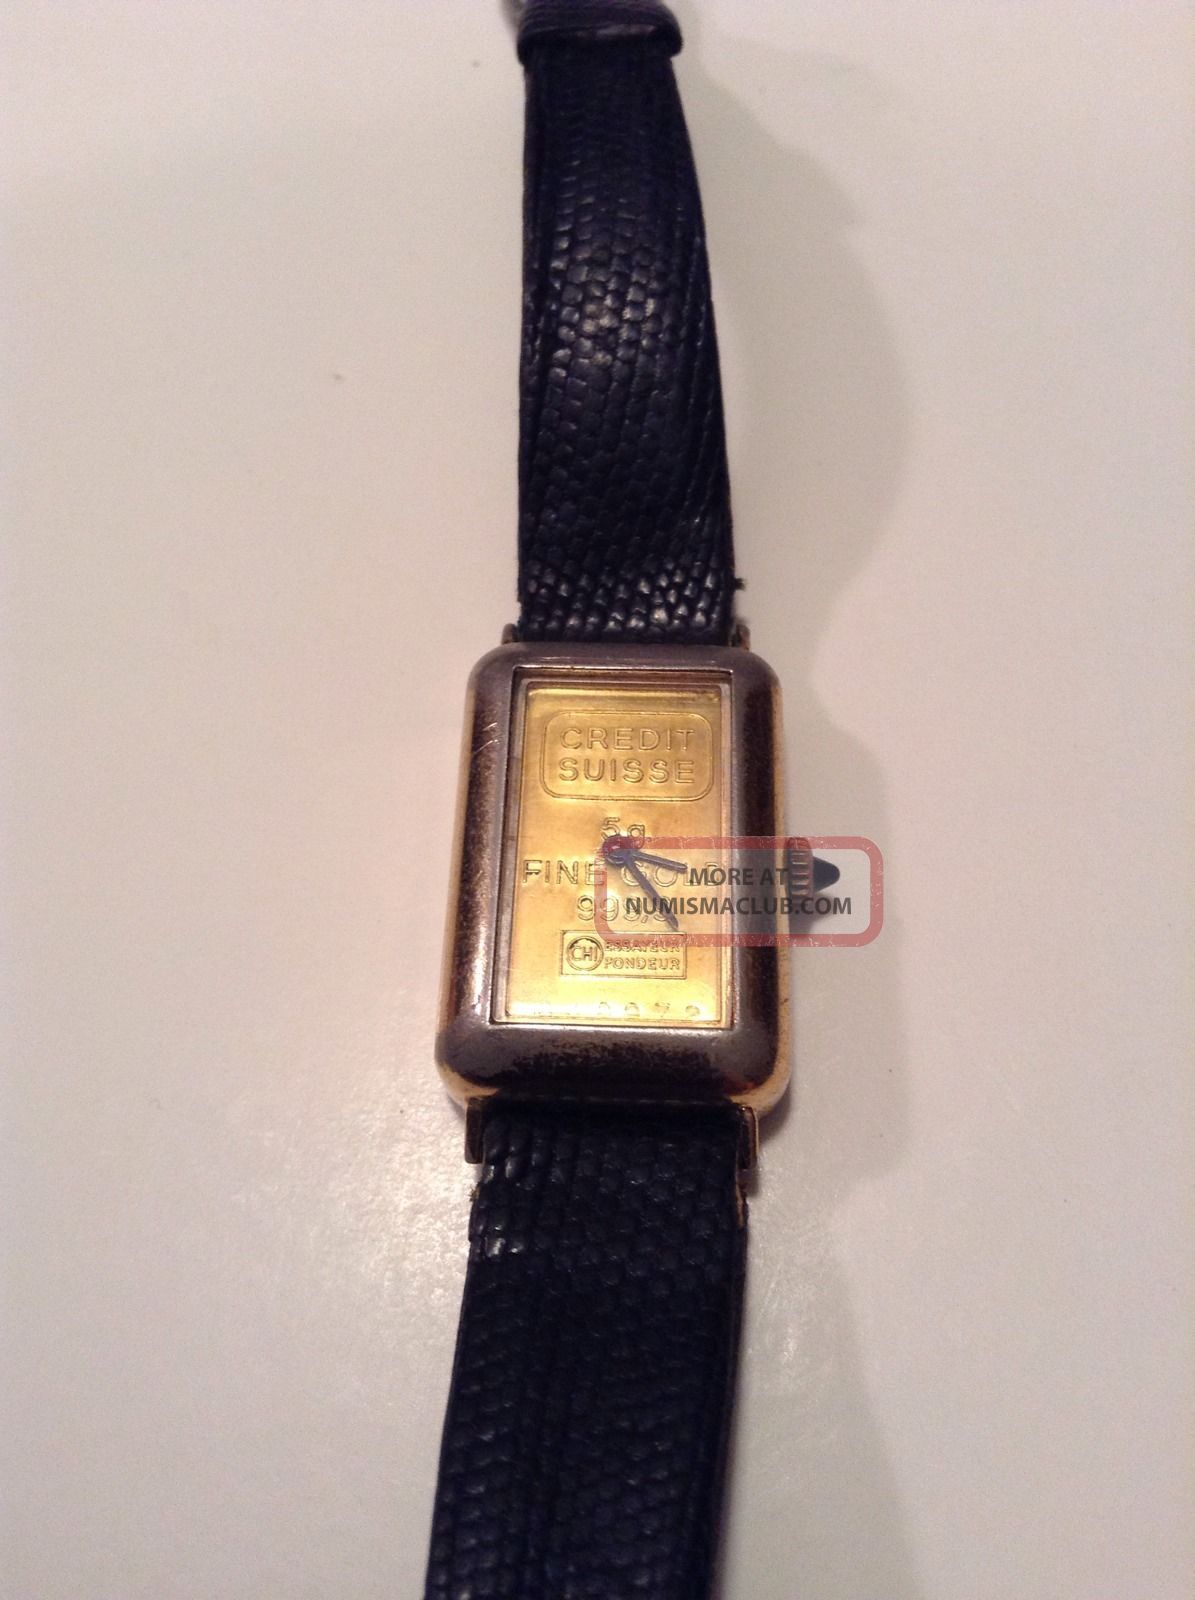 5 Gram Credit Suisse 99. 9 Gold Bar Watch Vintage With Lizard Band